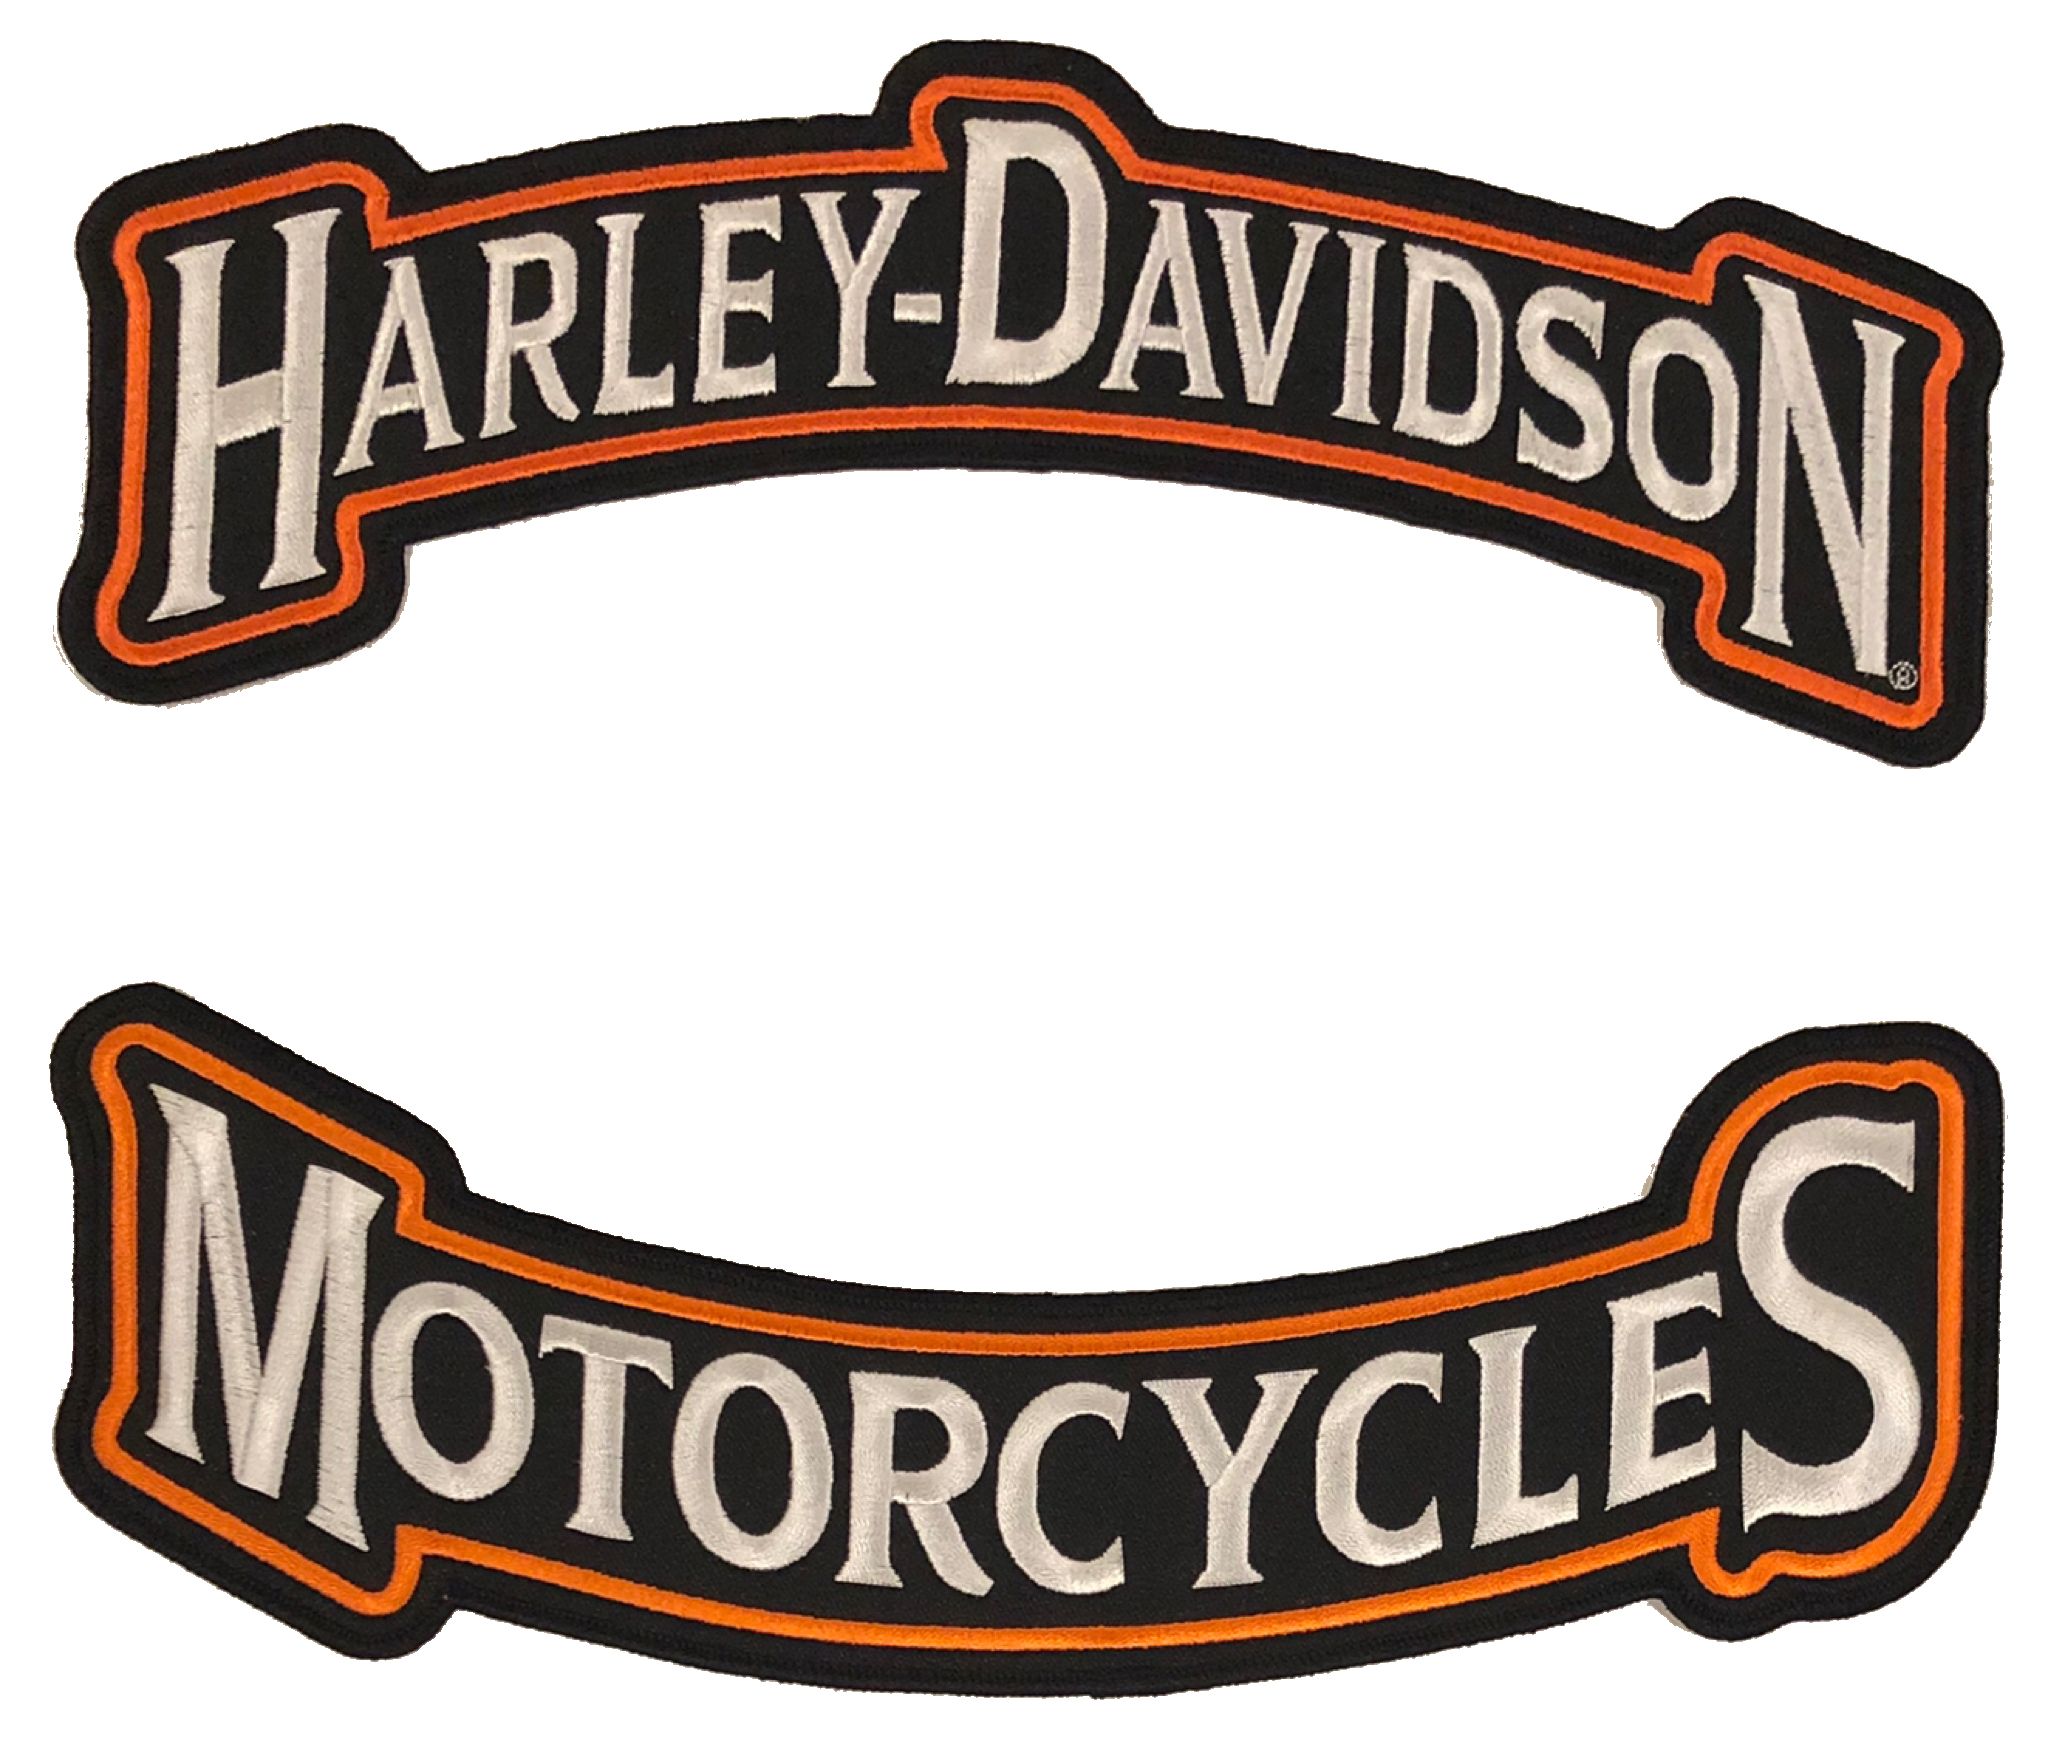 43-HARLEY-DAVIDSON MOTORCYCLE ROCKER BACK PATCHES (ONLY)